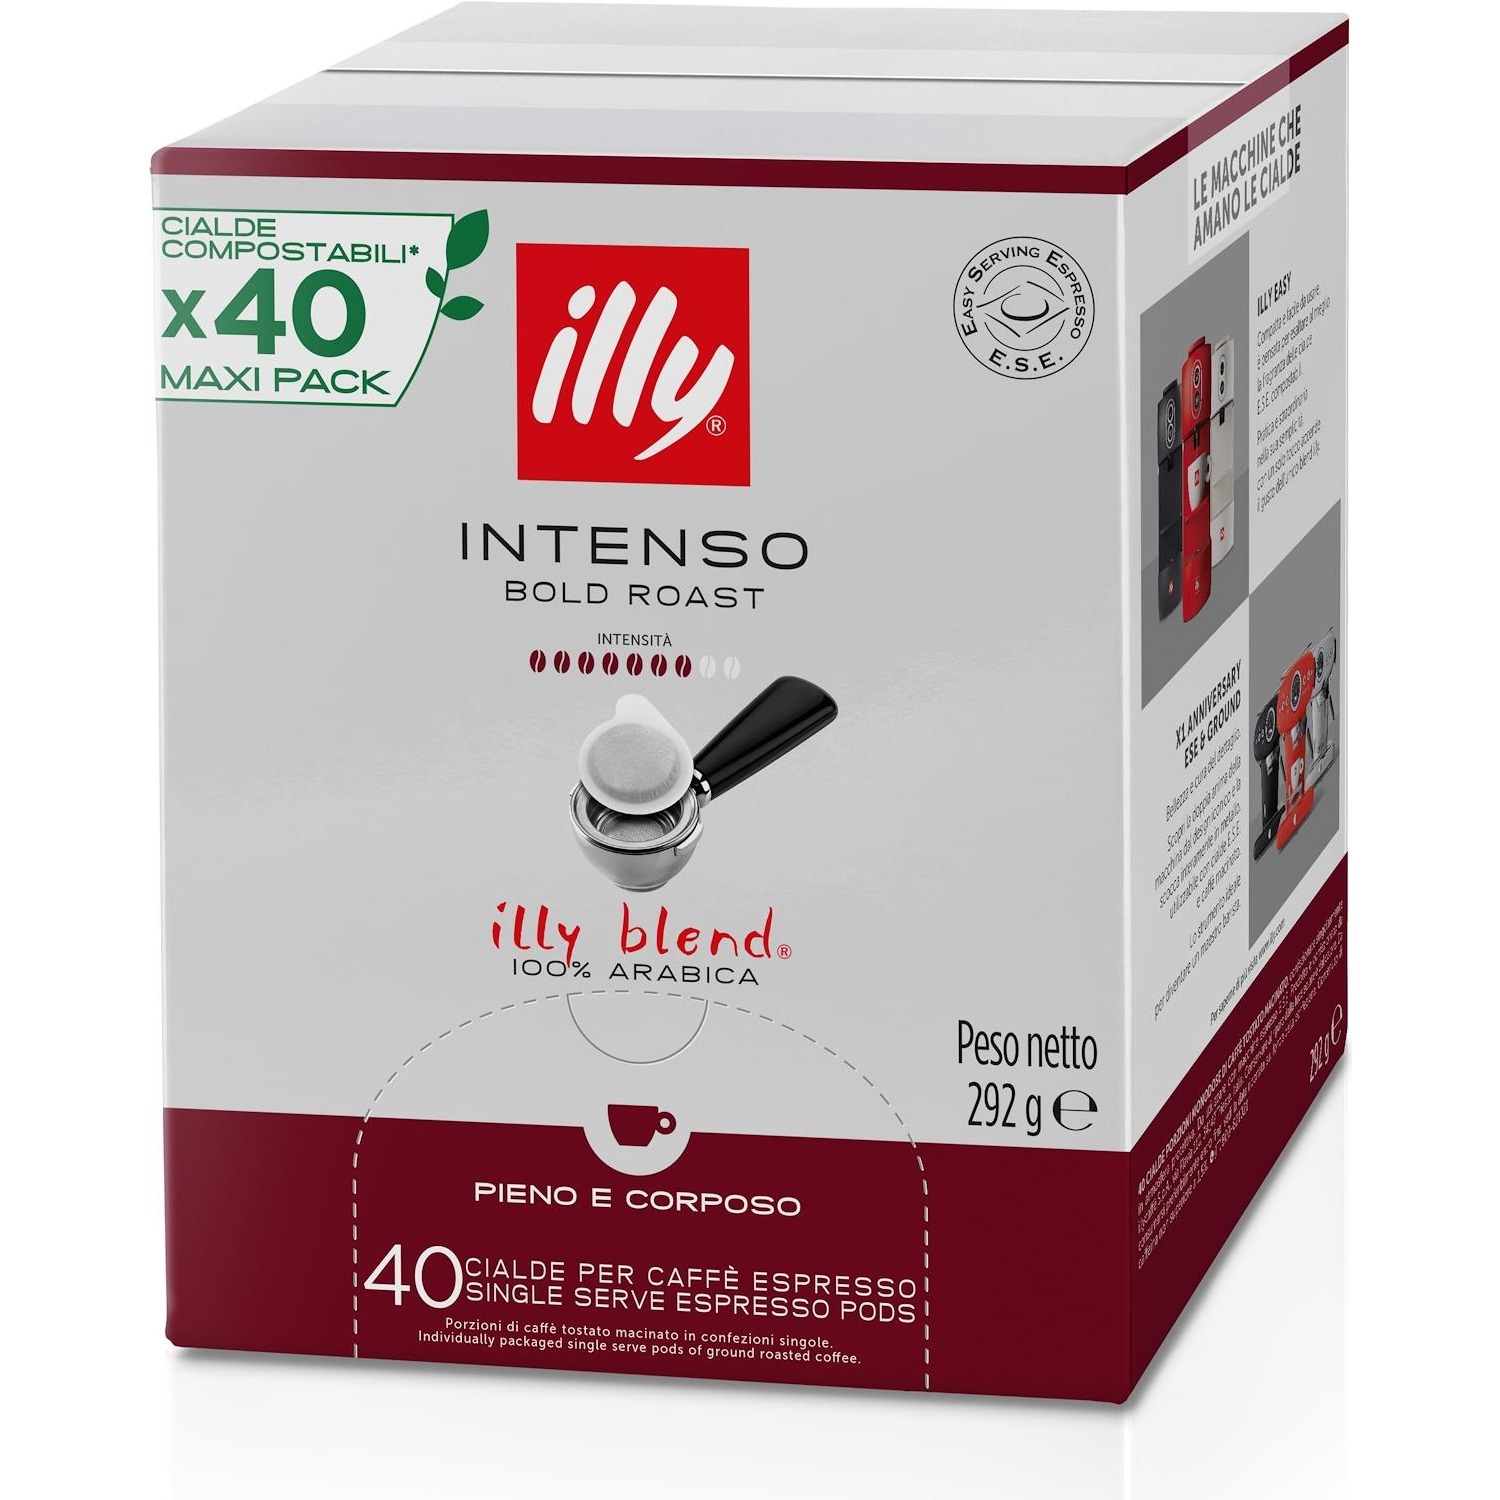 https://images.dimostore.it/1500/illy-cialda-intensa-40pz-ciaillintenso40.jpg